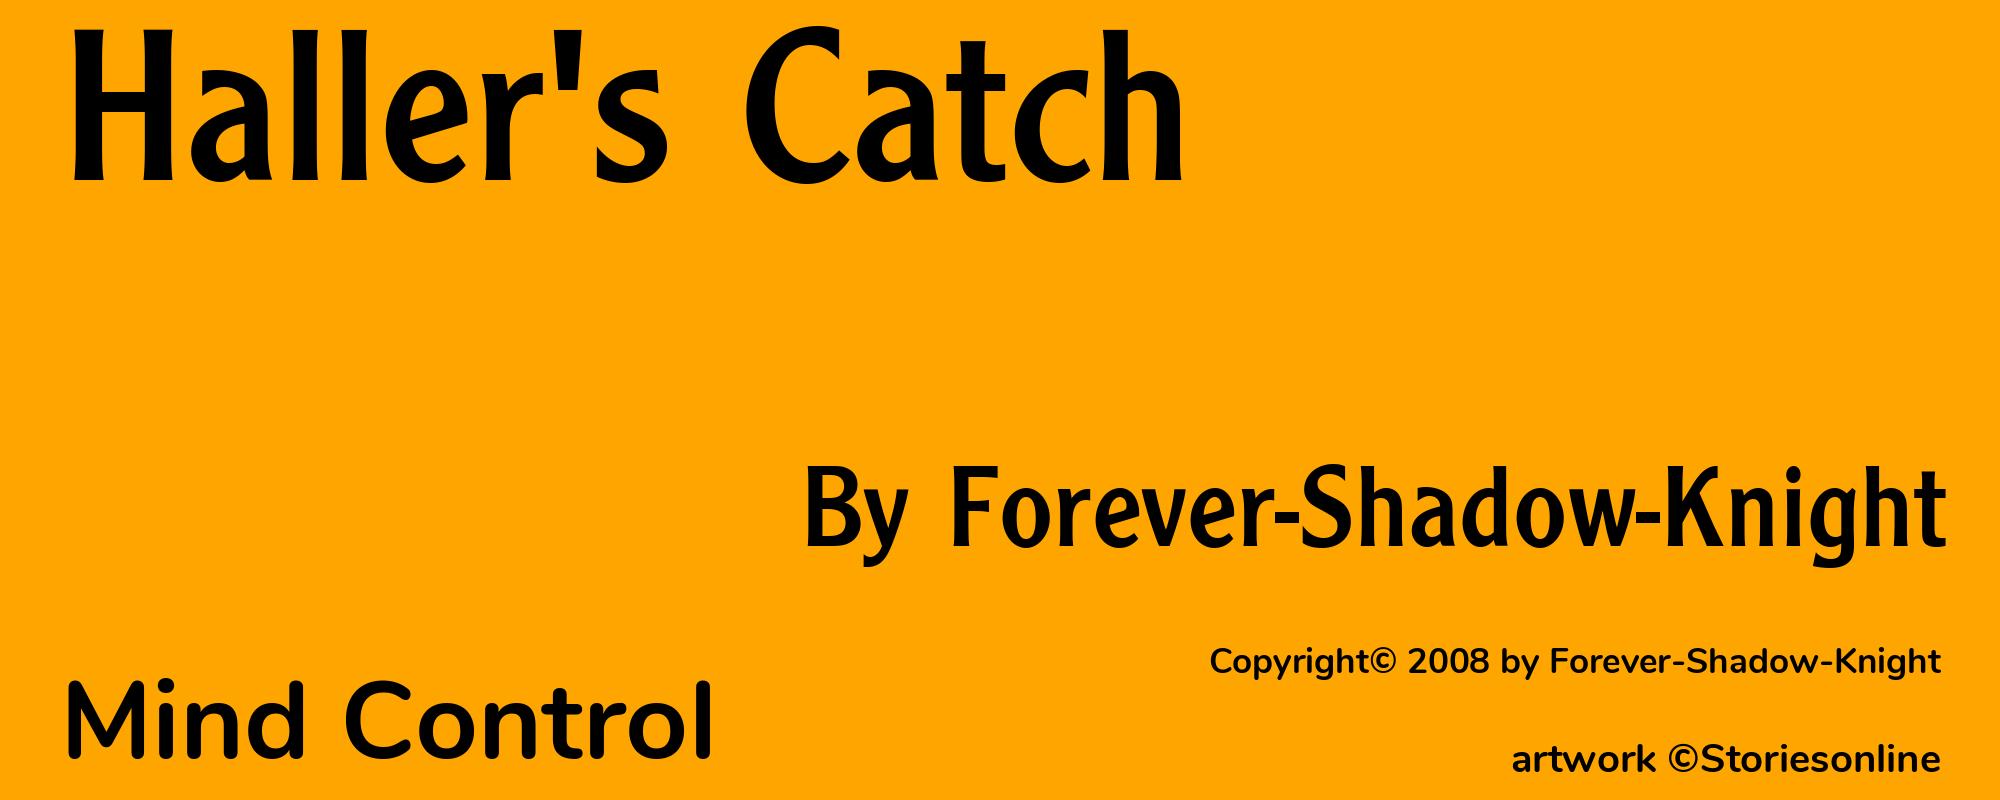 Haller's Catch - Cover